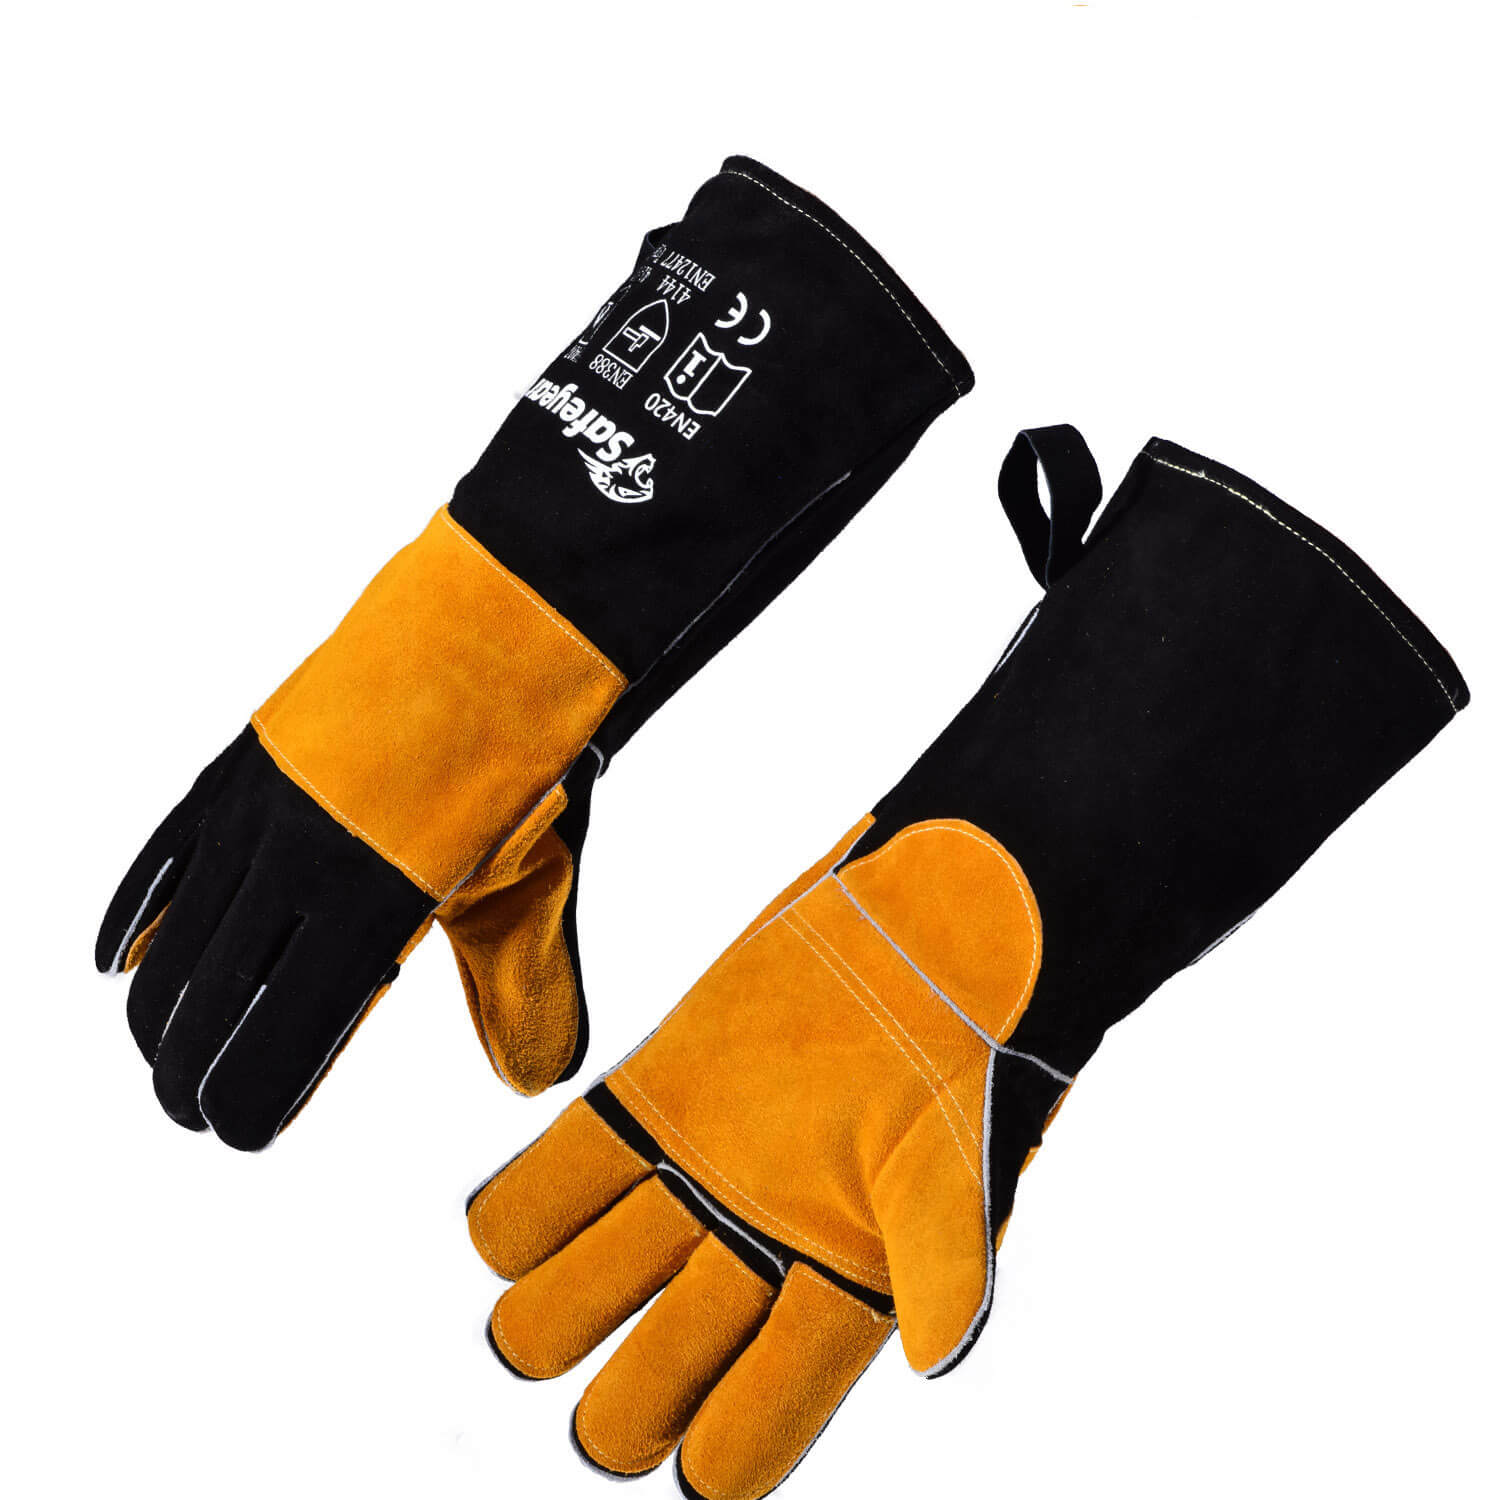 Safeyear Heat Resistant Leather Welding Gloves Forge Mig/Stick Gloves With Kevlar Stitching